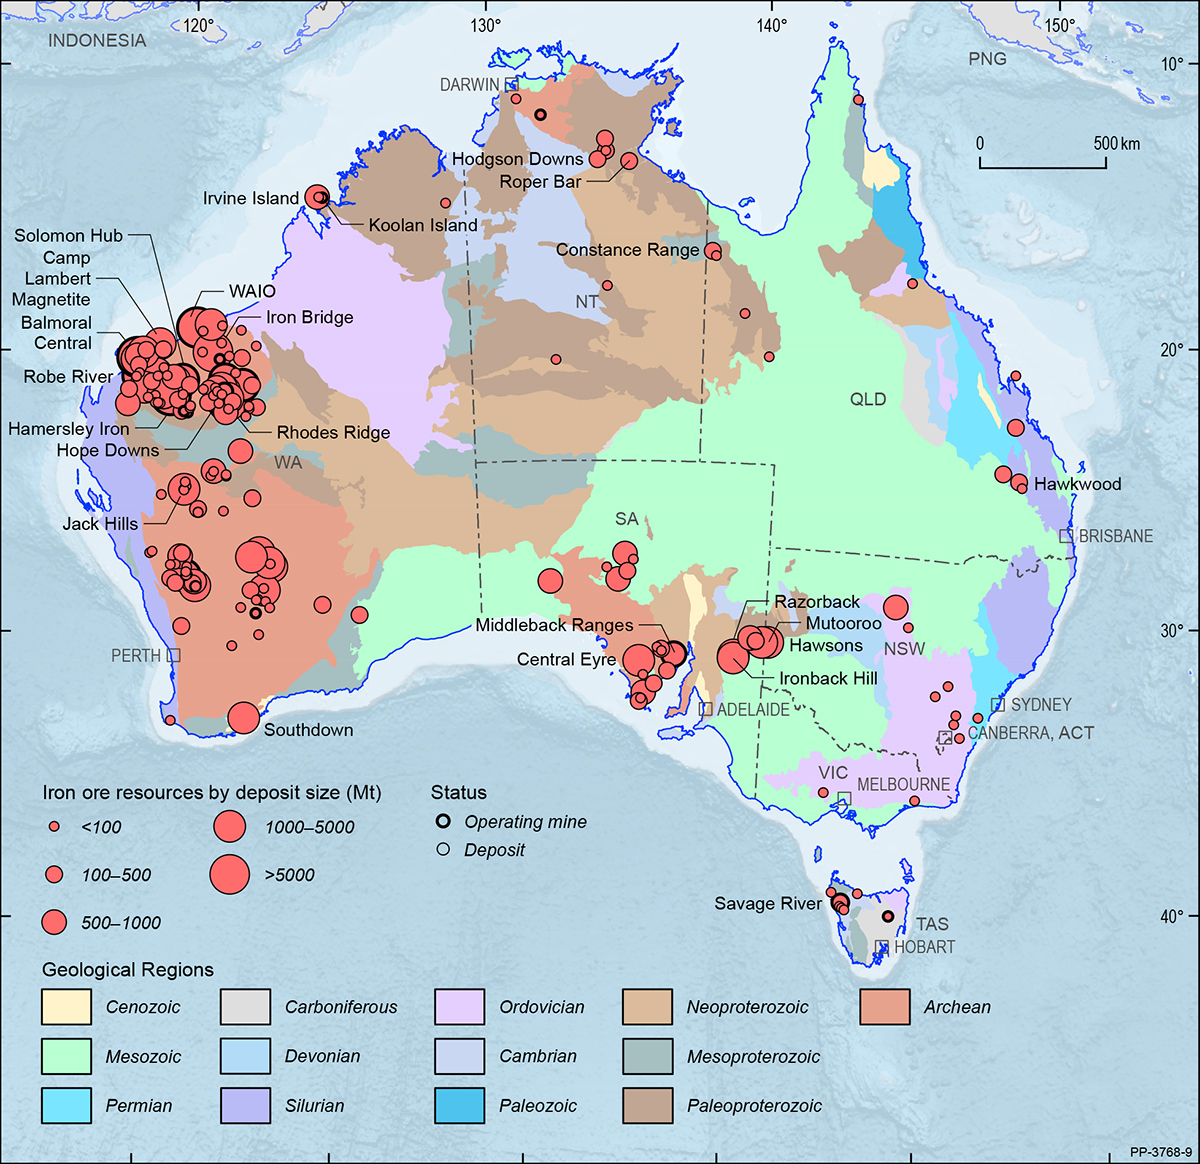 A map showing the Australian continent shaded by the ages of the main geological provinces highlighting the geographical distribution of Australian iron ore deposits and operating mines in 2019.